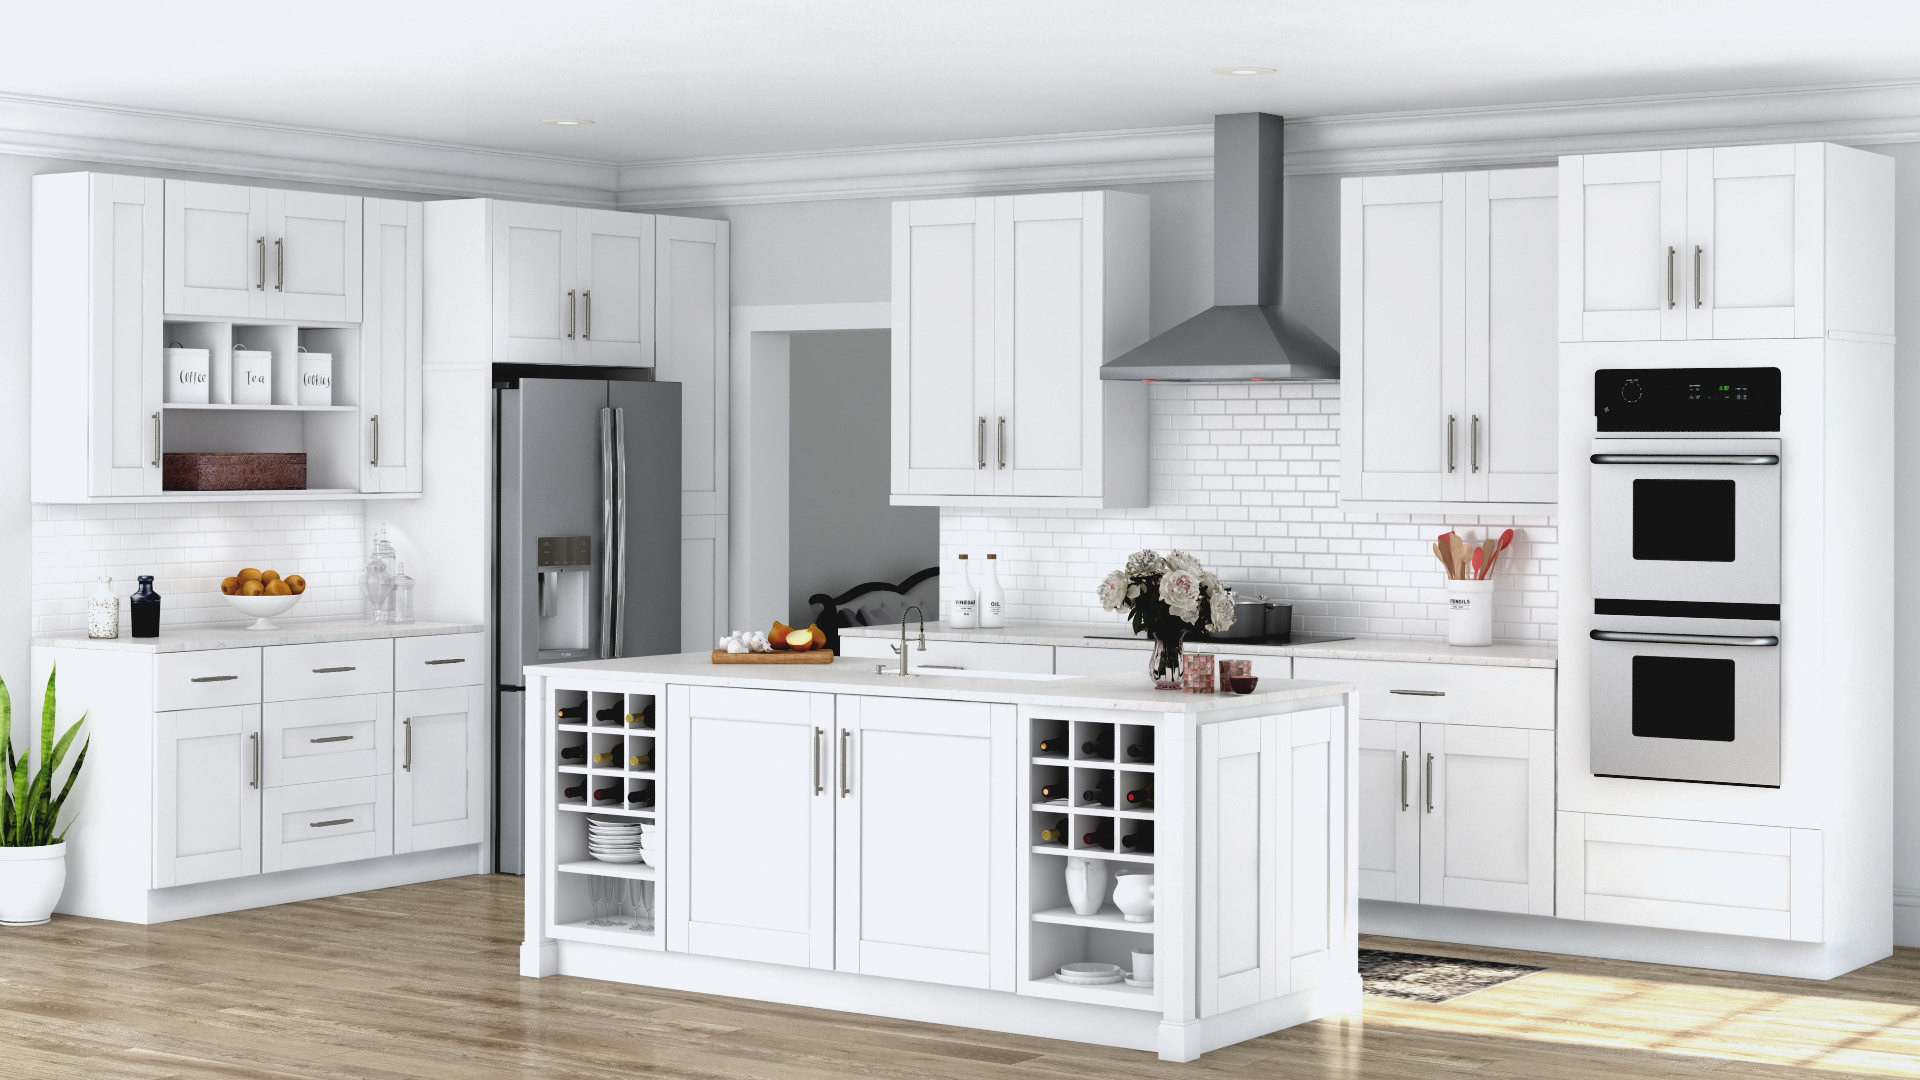 Home Depot Kitchen Cabinet
 Shaker Specialty Cabinets in White – Kitchen – The Home Depot